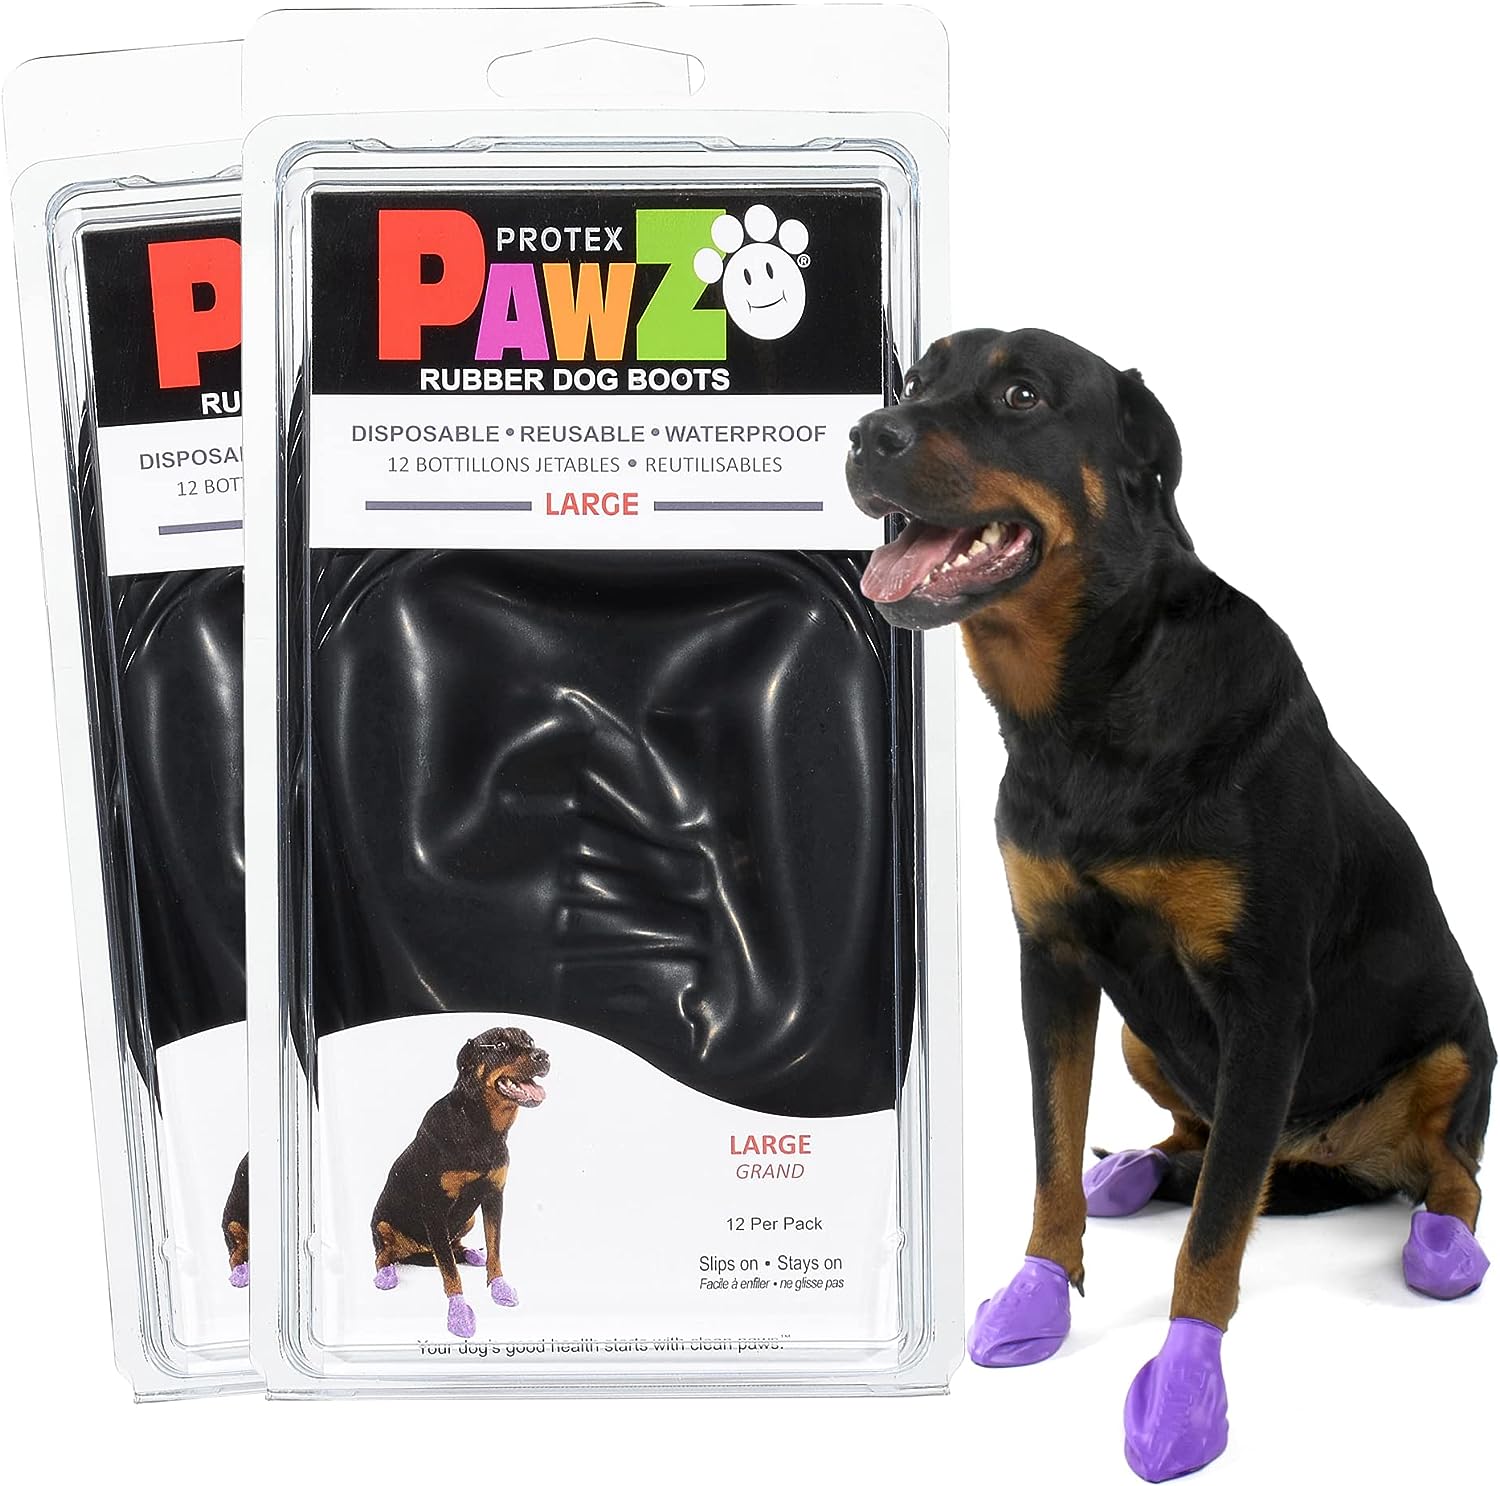 PawZ Rubber Dog Boots for Paws up to 4, 24 Total (2 Packs of 12) - All-Weather Dog Booties for Hot Pavement, Snow, Mud, and Rain - Waterproof, Anti Slip Dog Socks - Large, Black